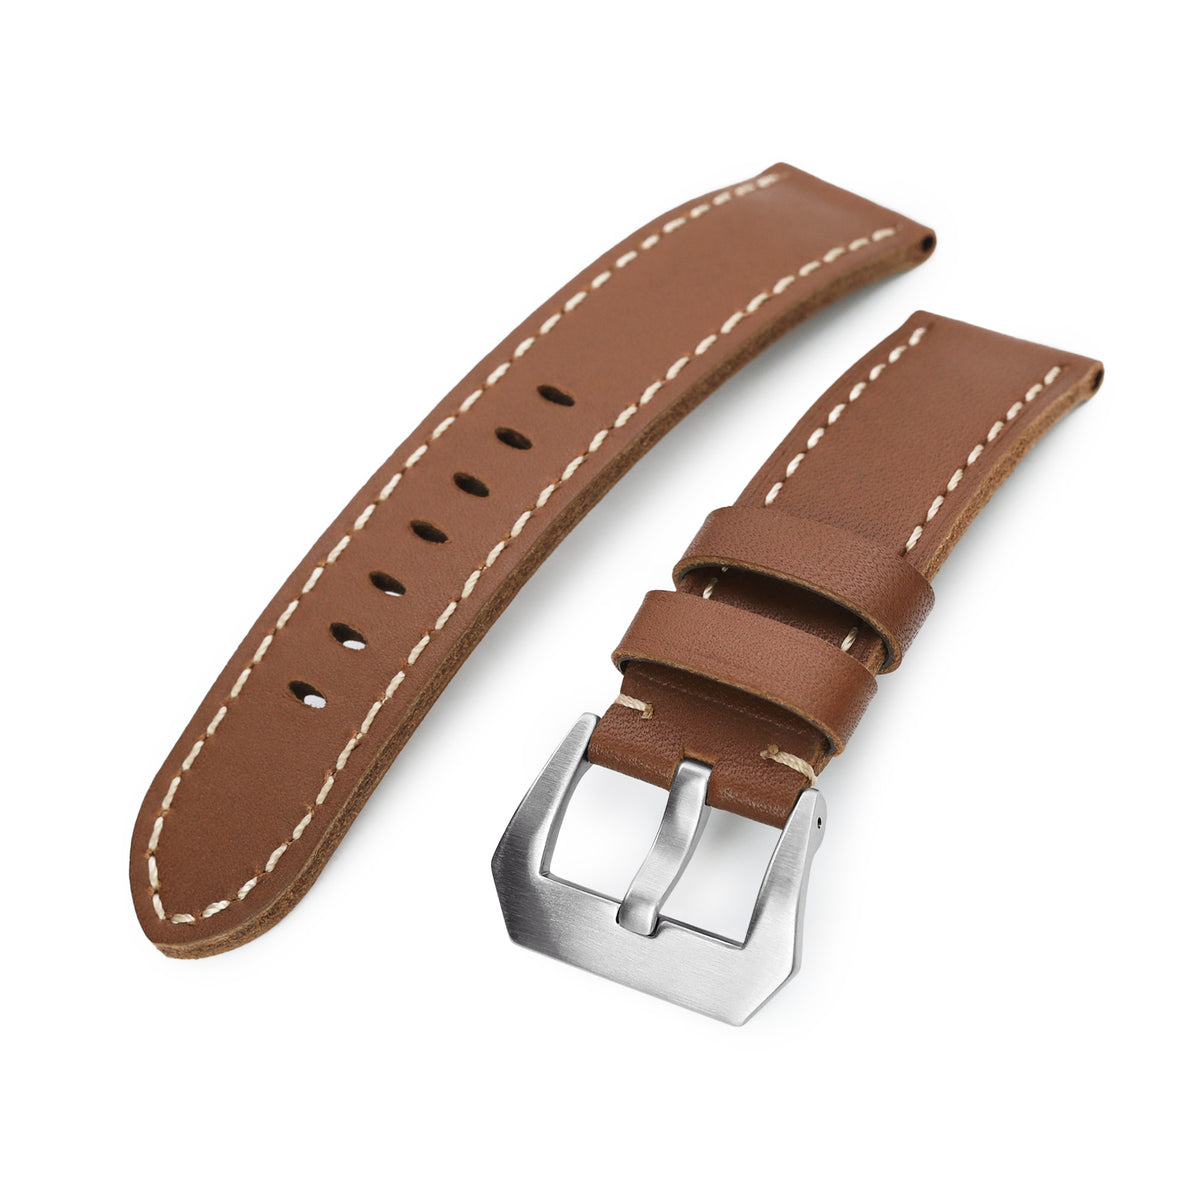 20mm Chestnut Italian Vintage Leather Military Watch Strap